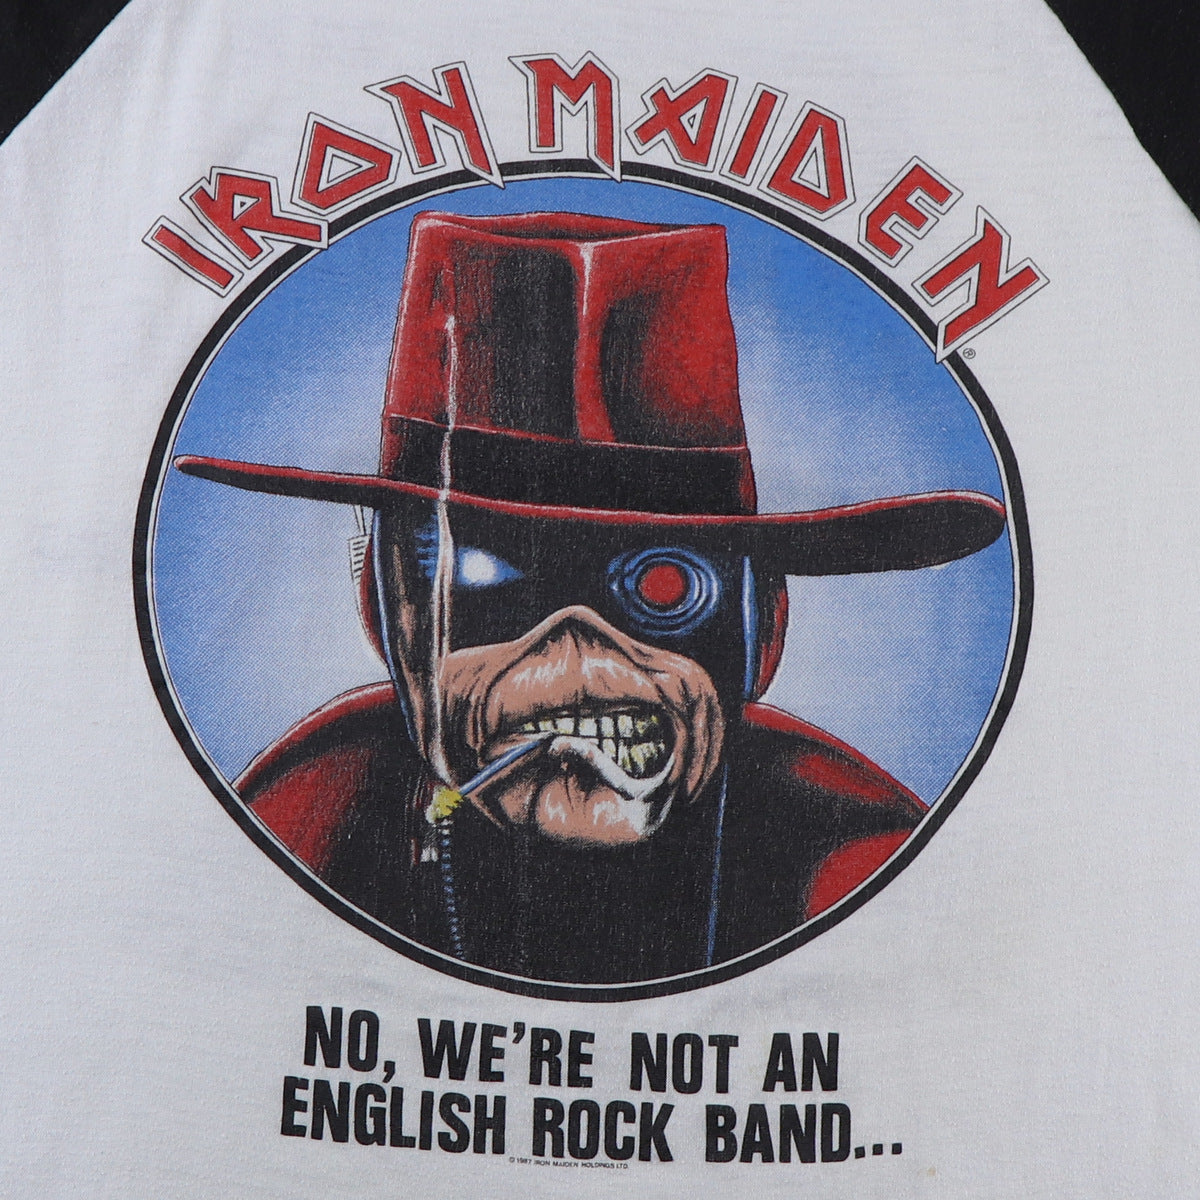 Wyco Vintage 1985 Iron Maiden 4th of July Concert Jersey Shirt